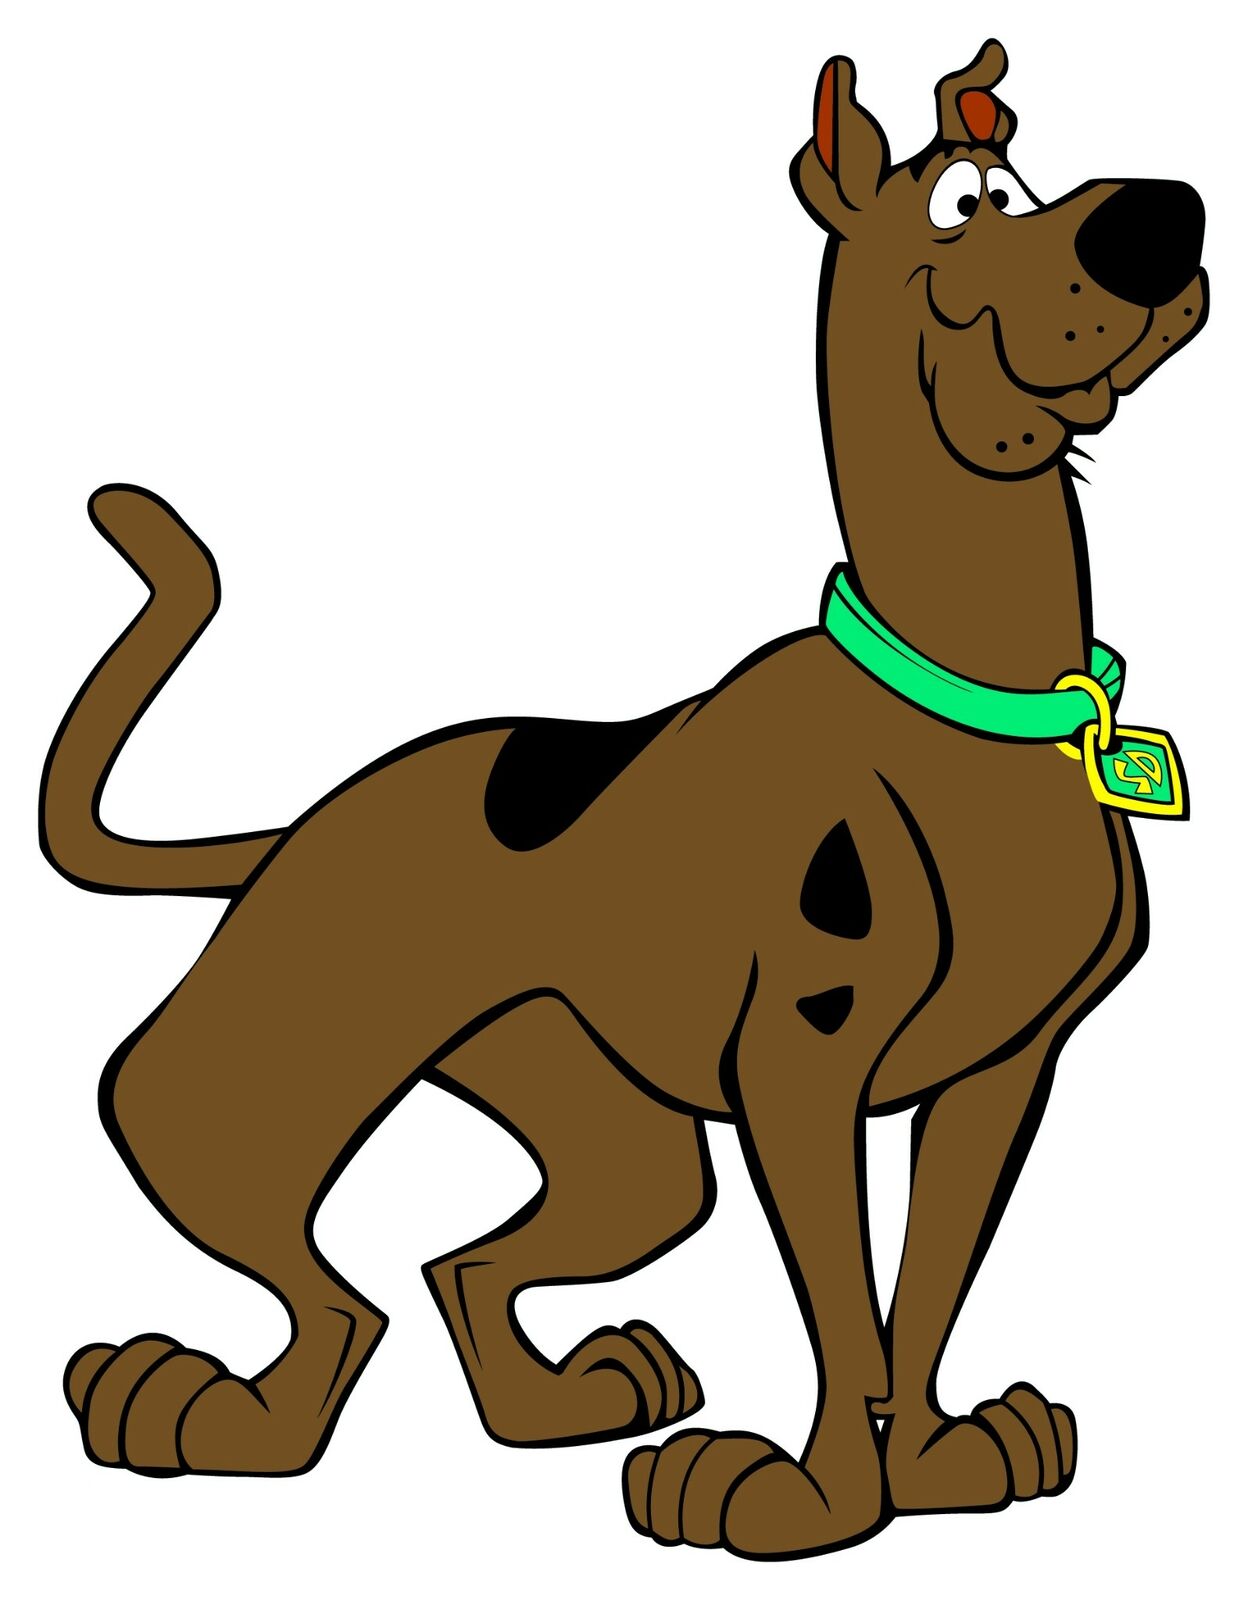 Scooby Doo Whole Body  Sticker / Vinyl  | 10 Sizes TRACKING FAST SHIP